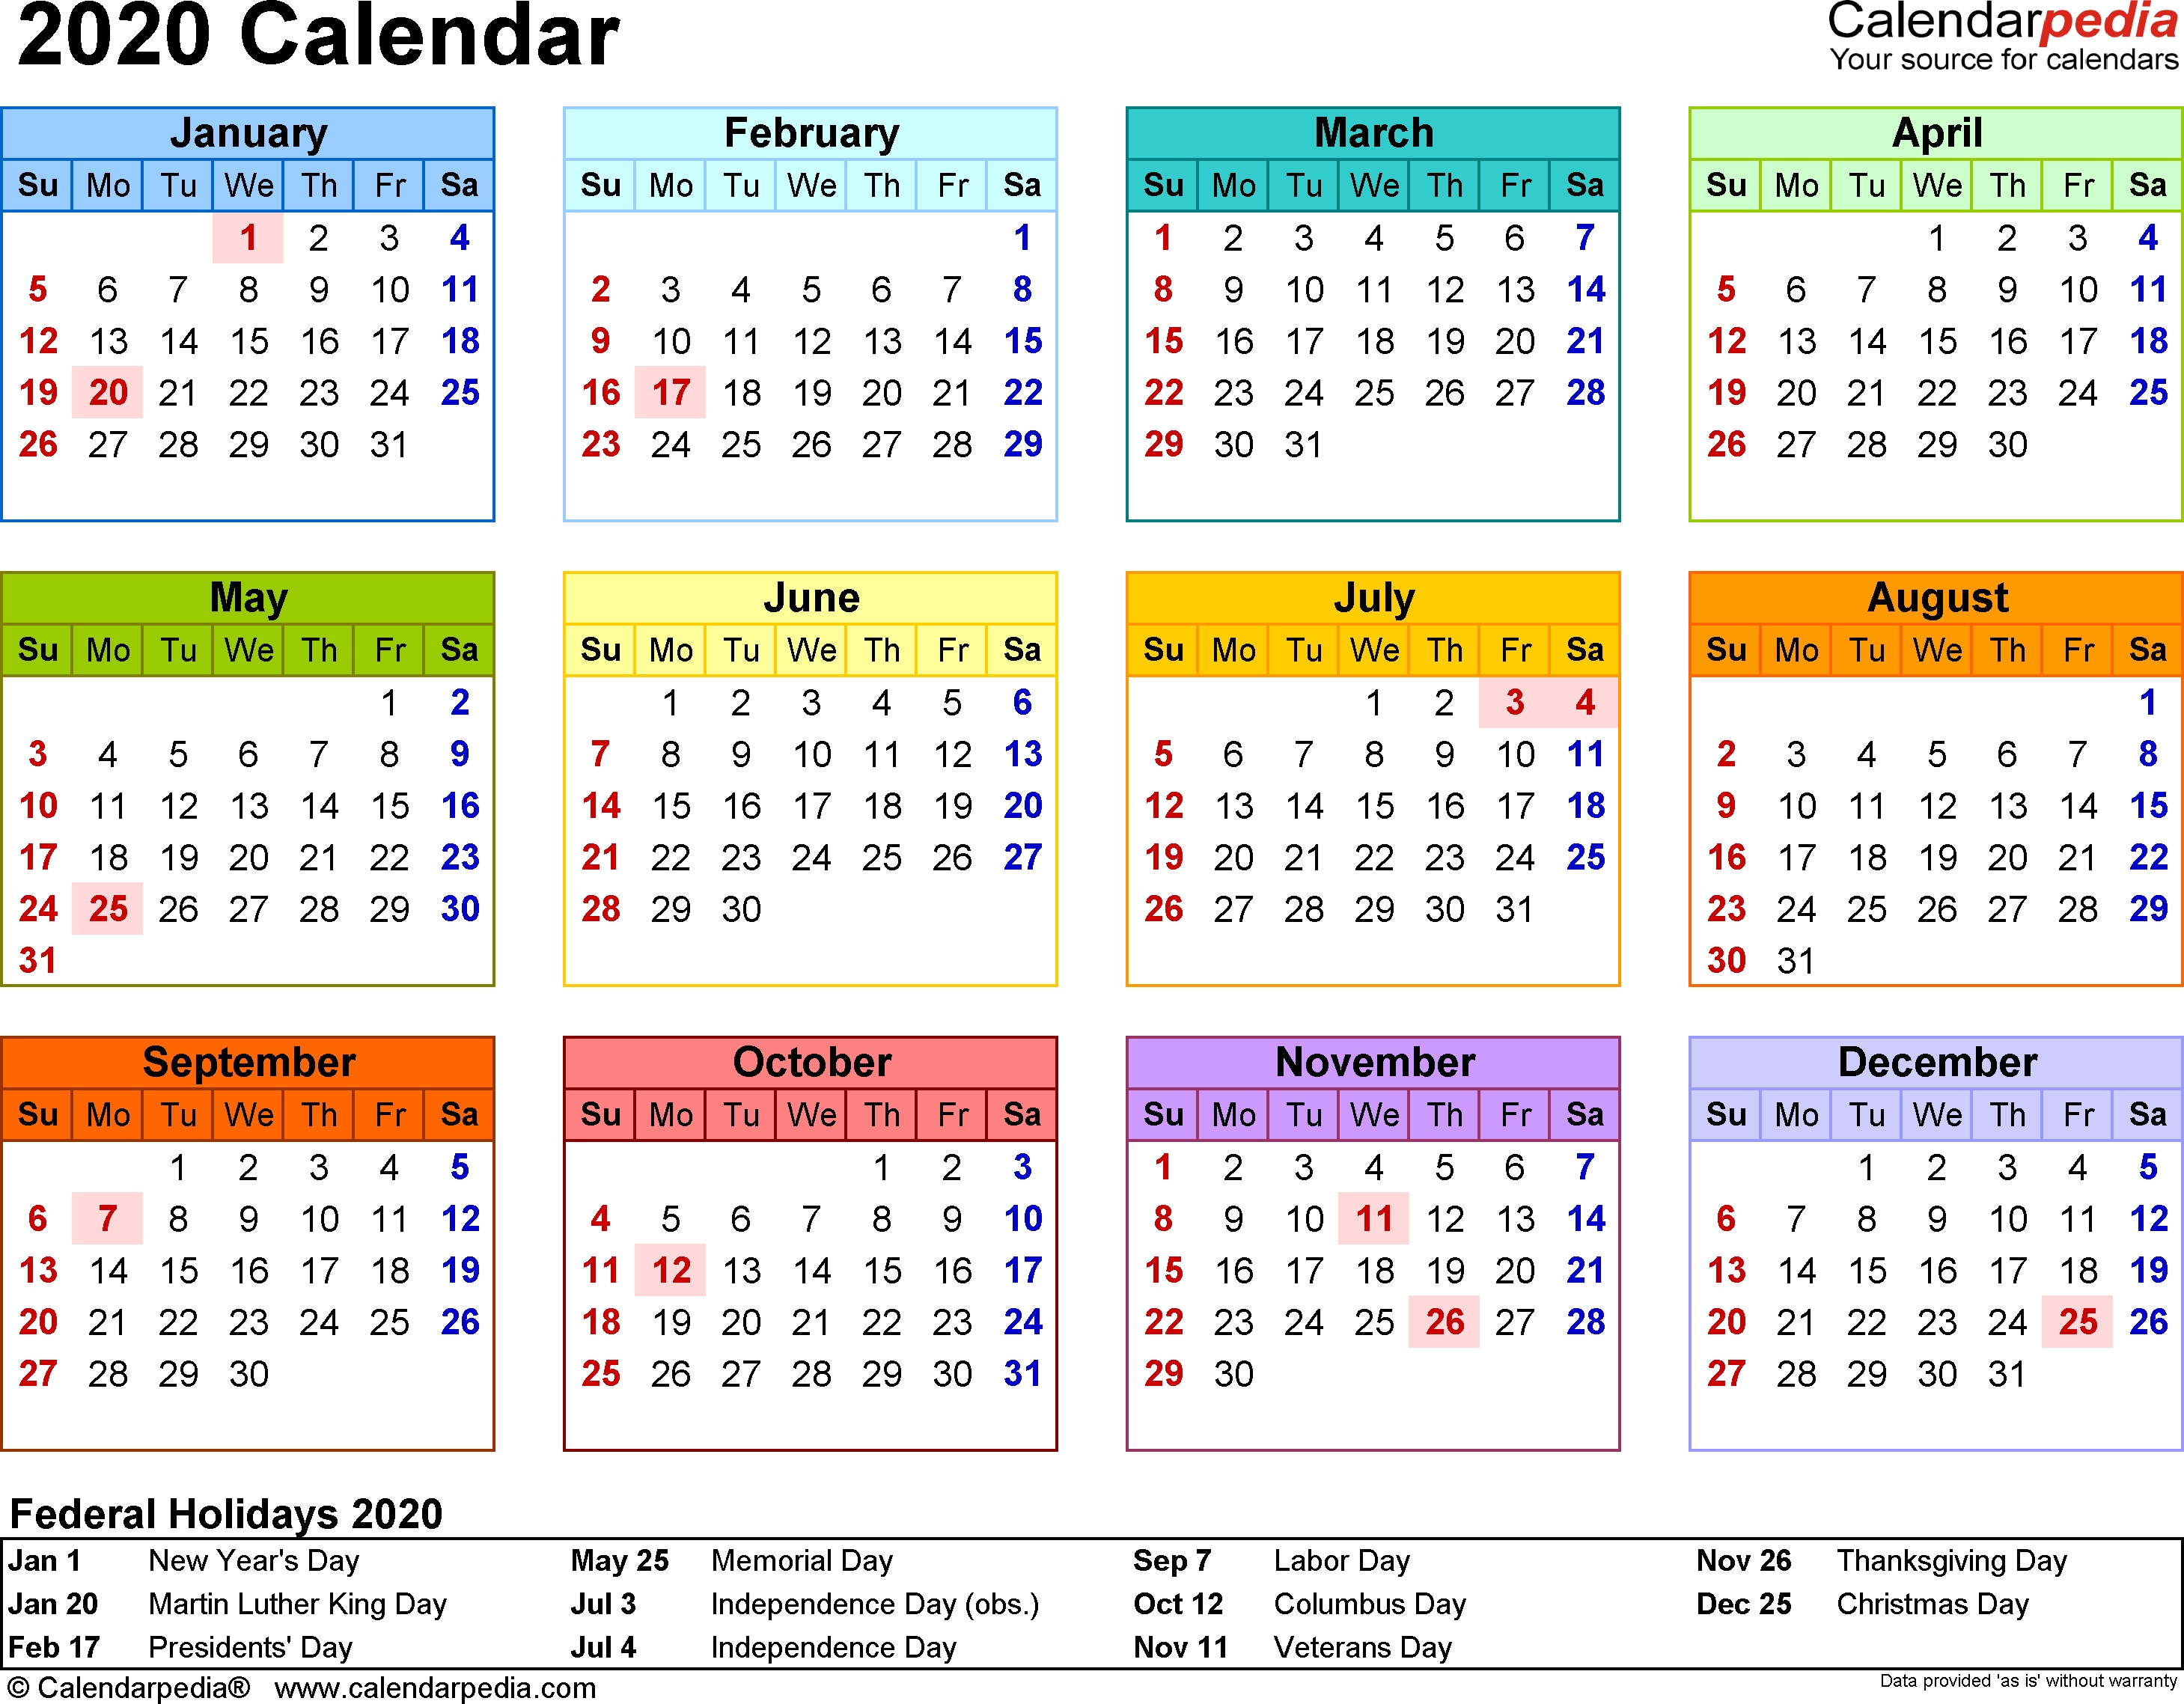 Calendar 2020 India With Holidays And Festivals – Get Your